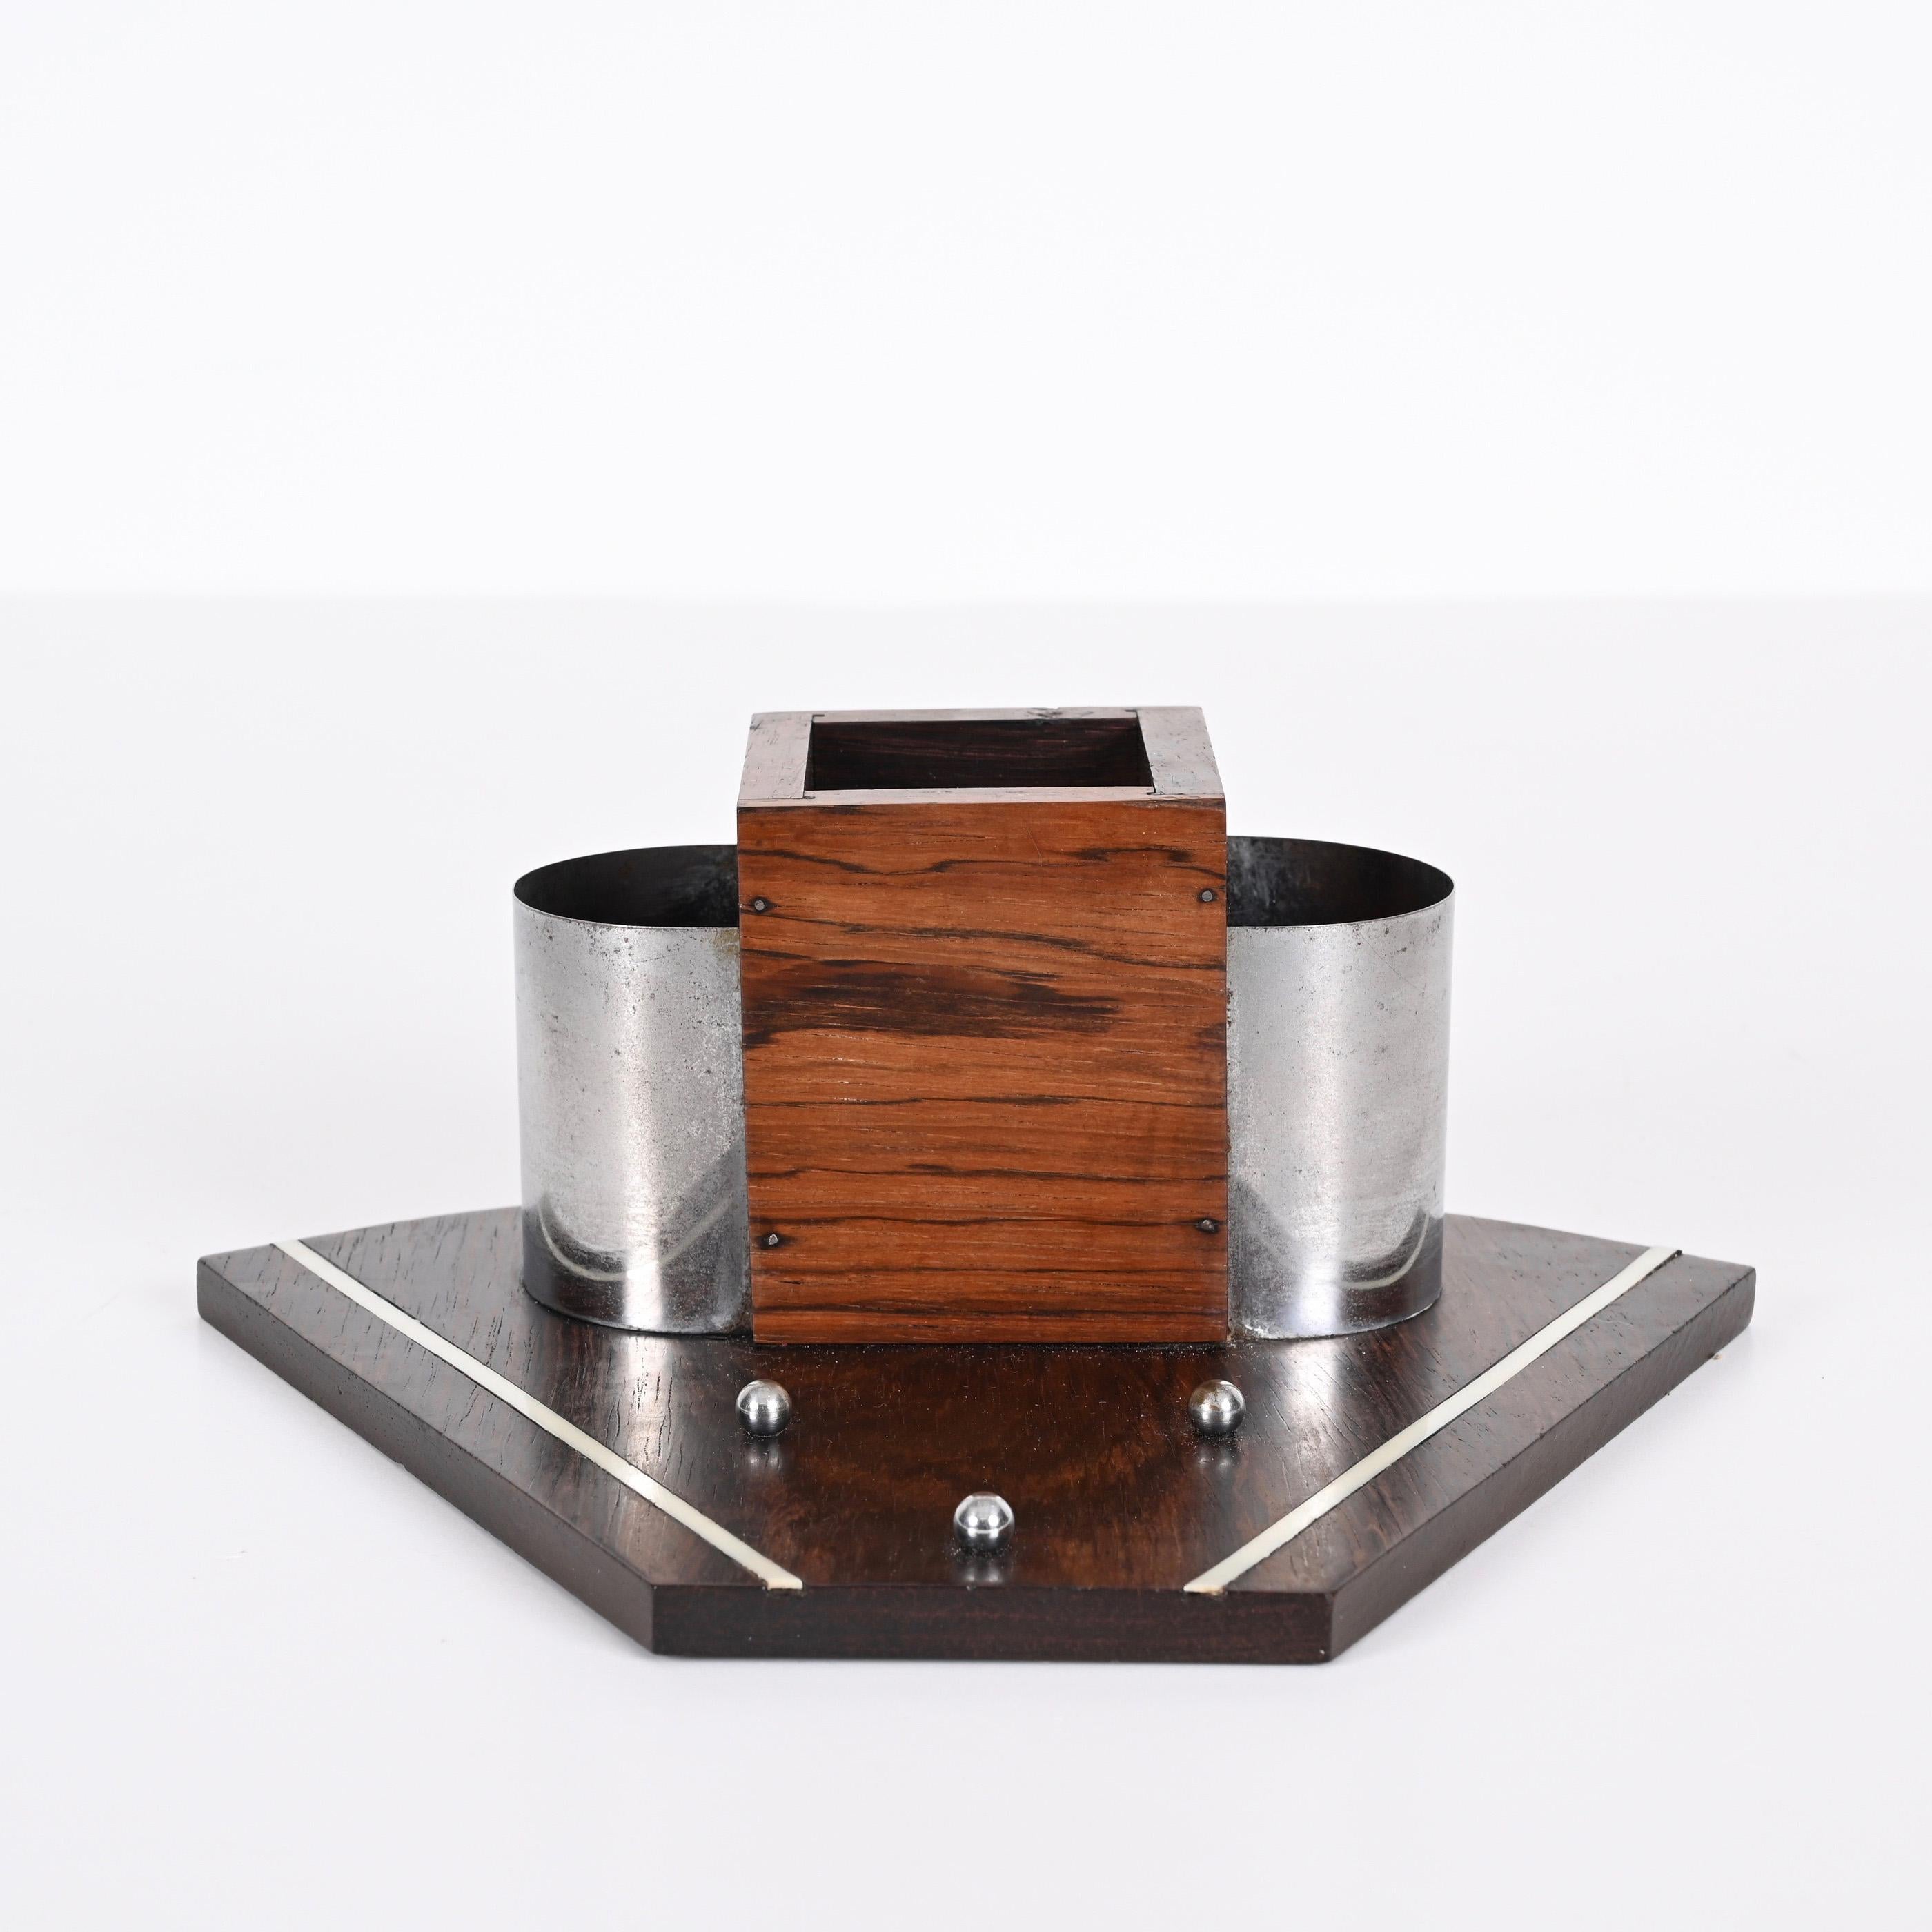 20th Century Art Deco Pen Holder in Macassar Wood, Italy Desk Accessory from the 1930s For Sale